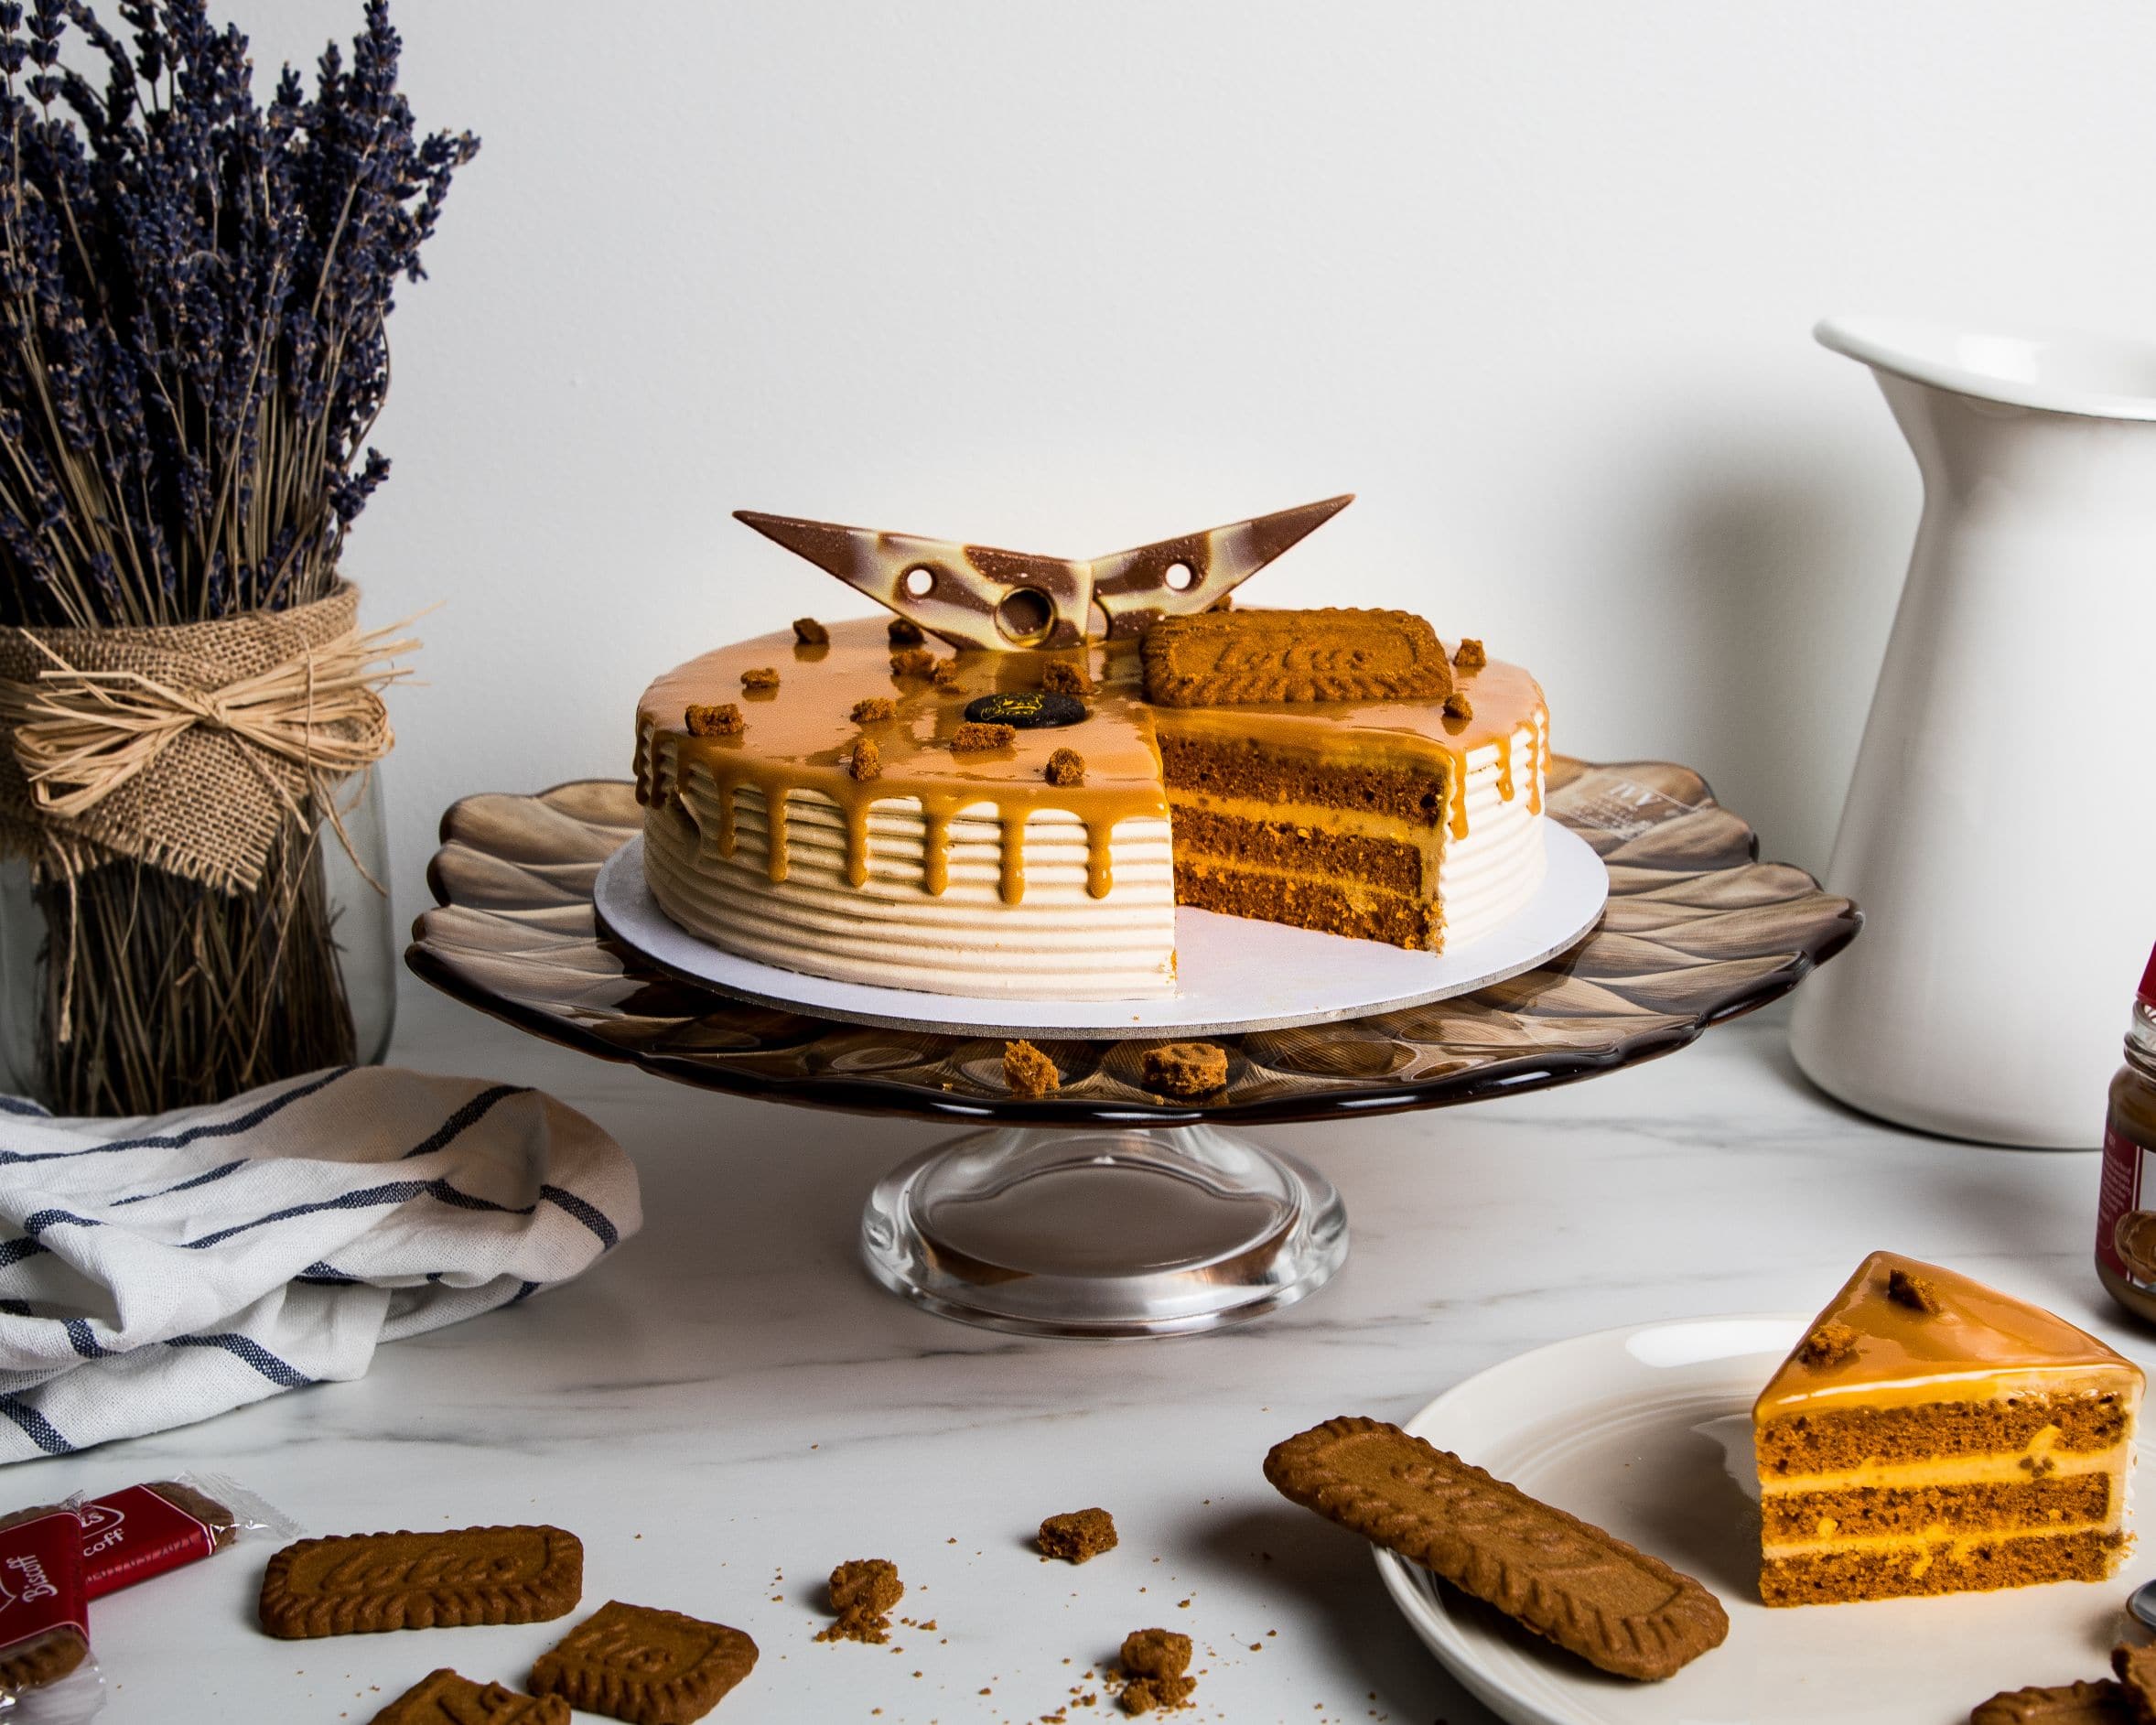 10+ Best Cake Shops in Abu Dhabi: Price, Location & More